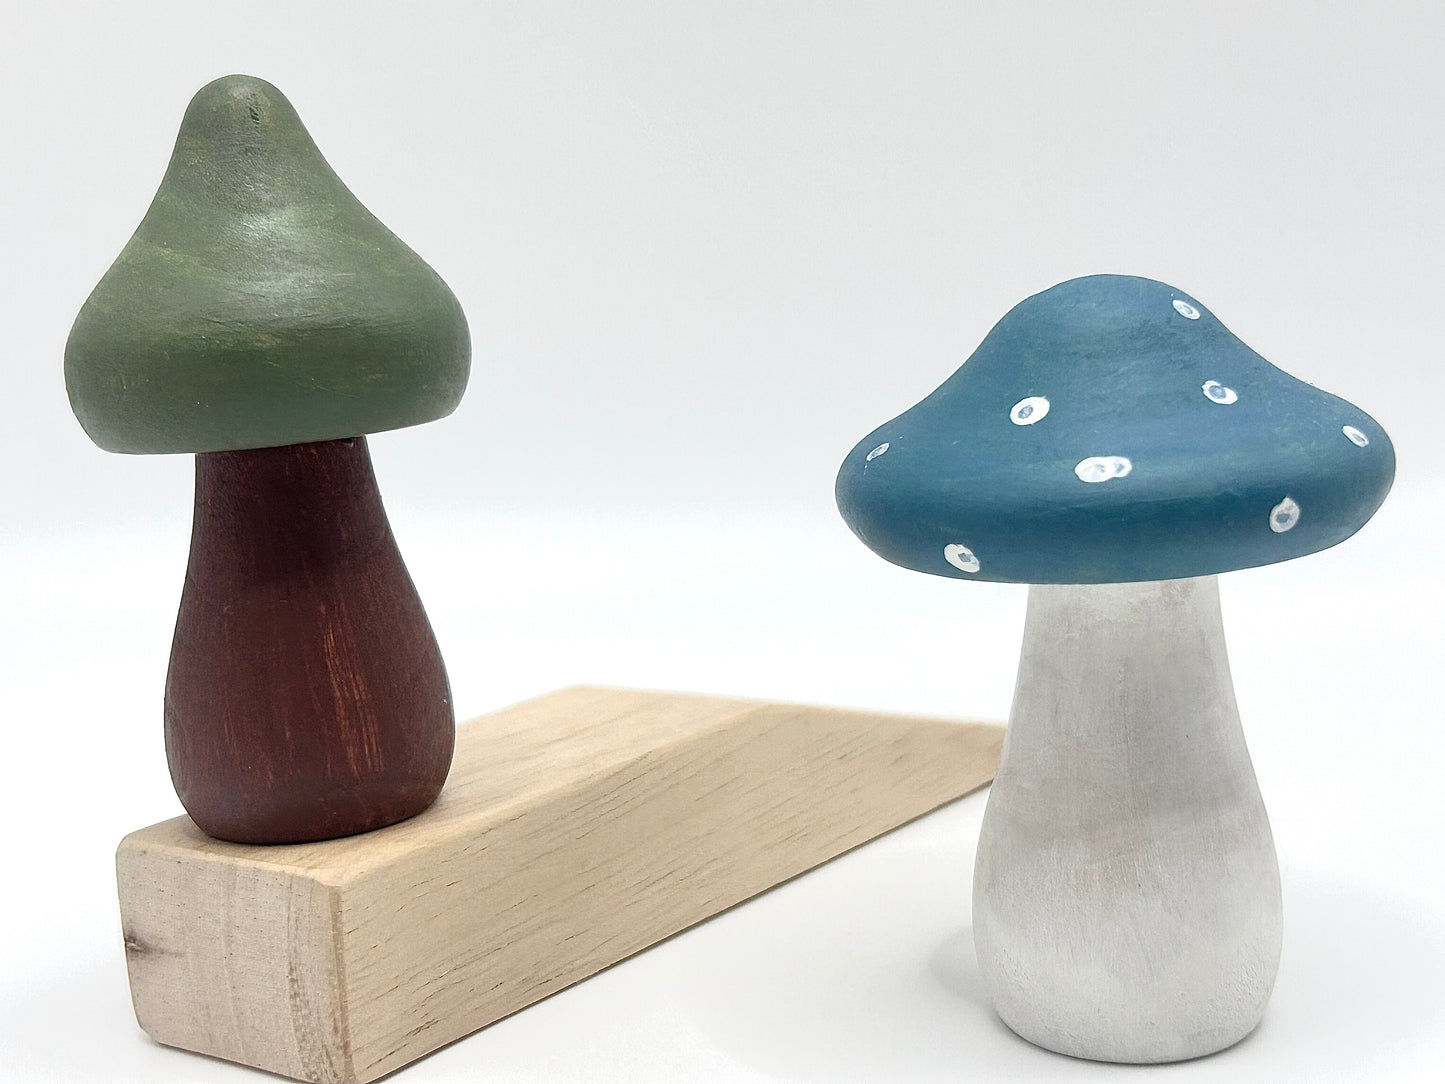 Enchanting Whimsy: Doorstop with Creative Woodcarve Mushroom Ornament